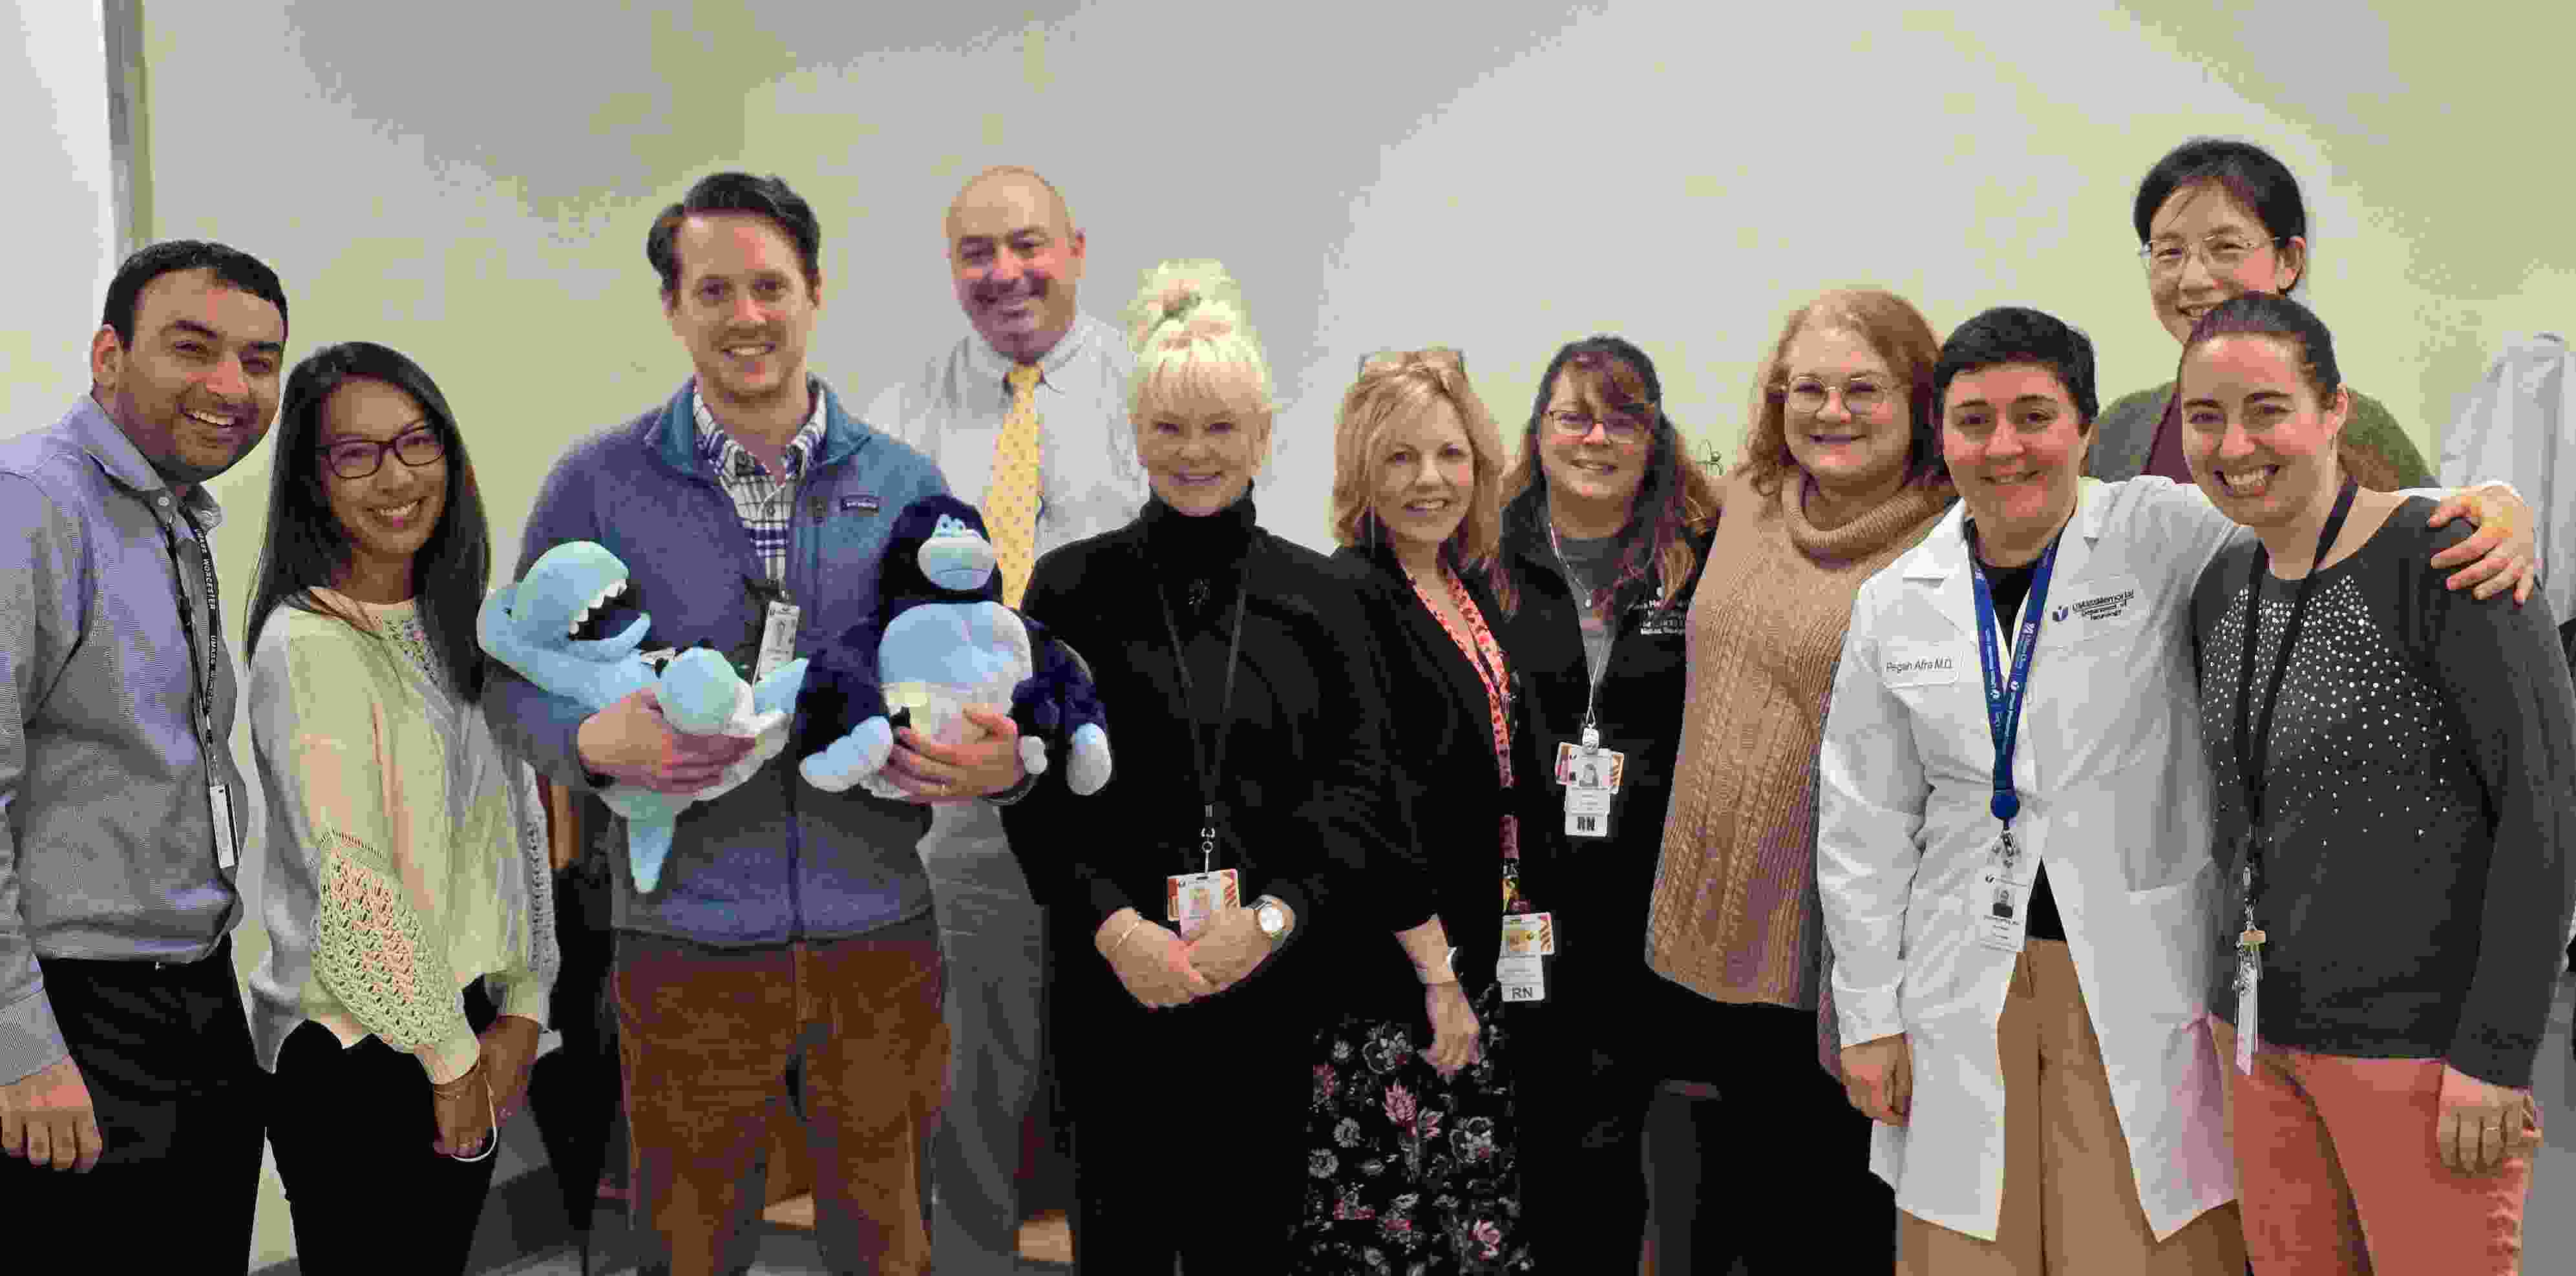 Our Epilepsy Center celebrates with a baby shower